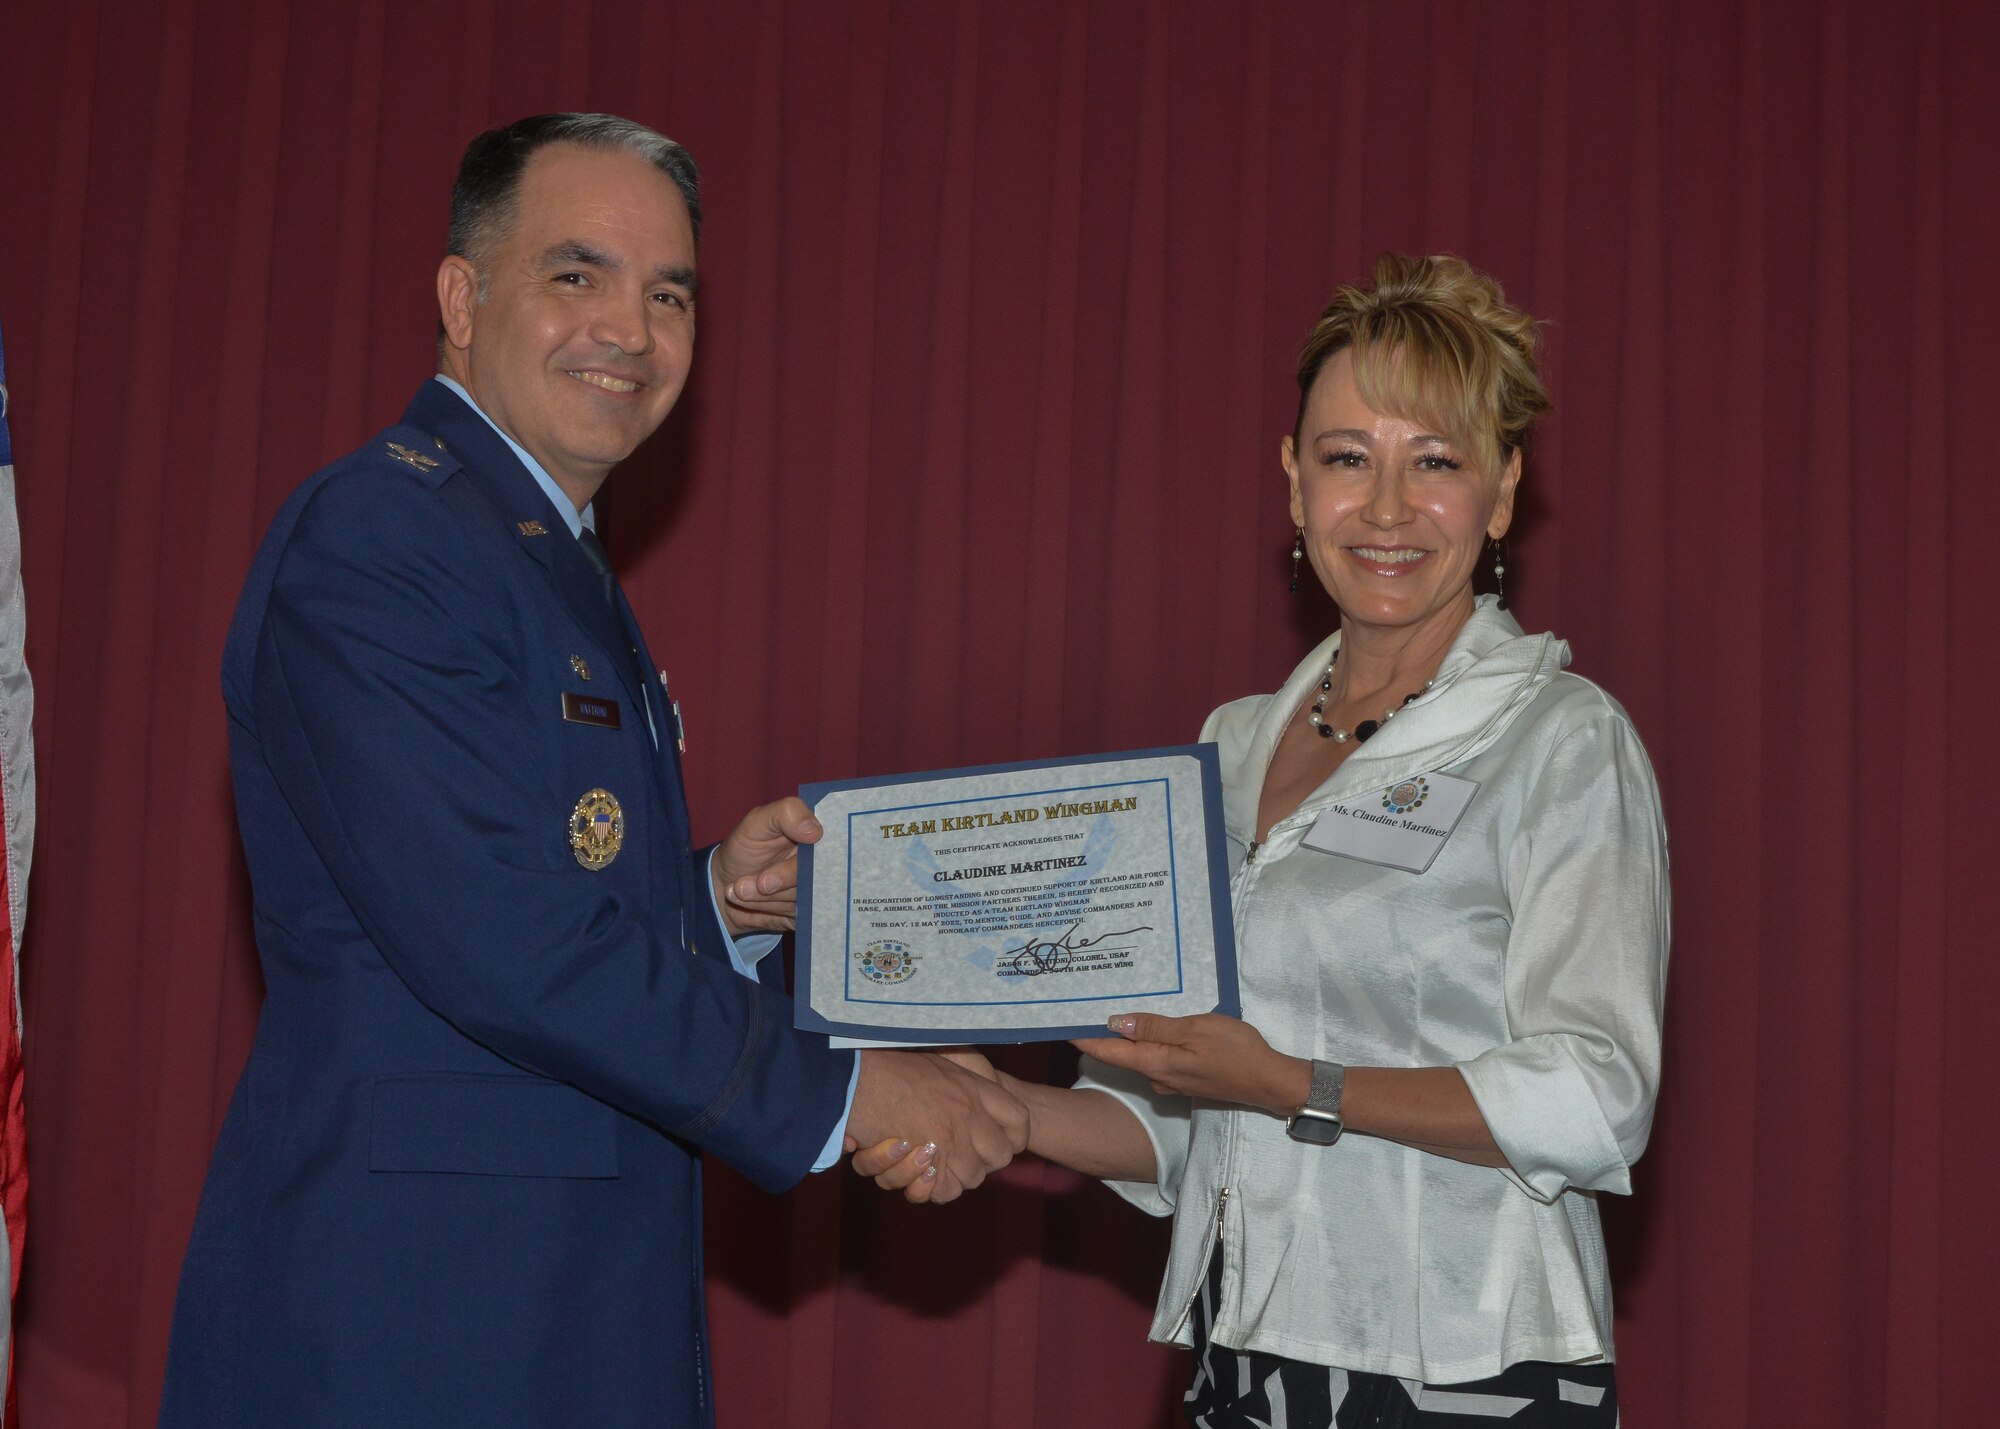 A man and woman hold a certificate and pose for a photo.